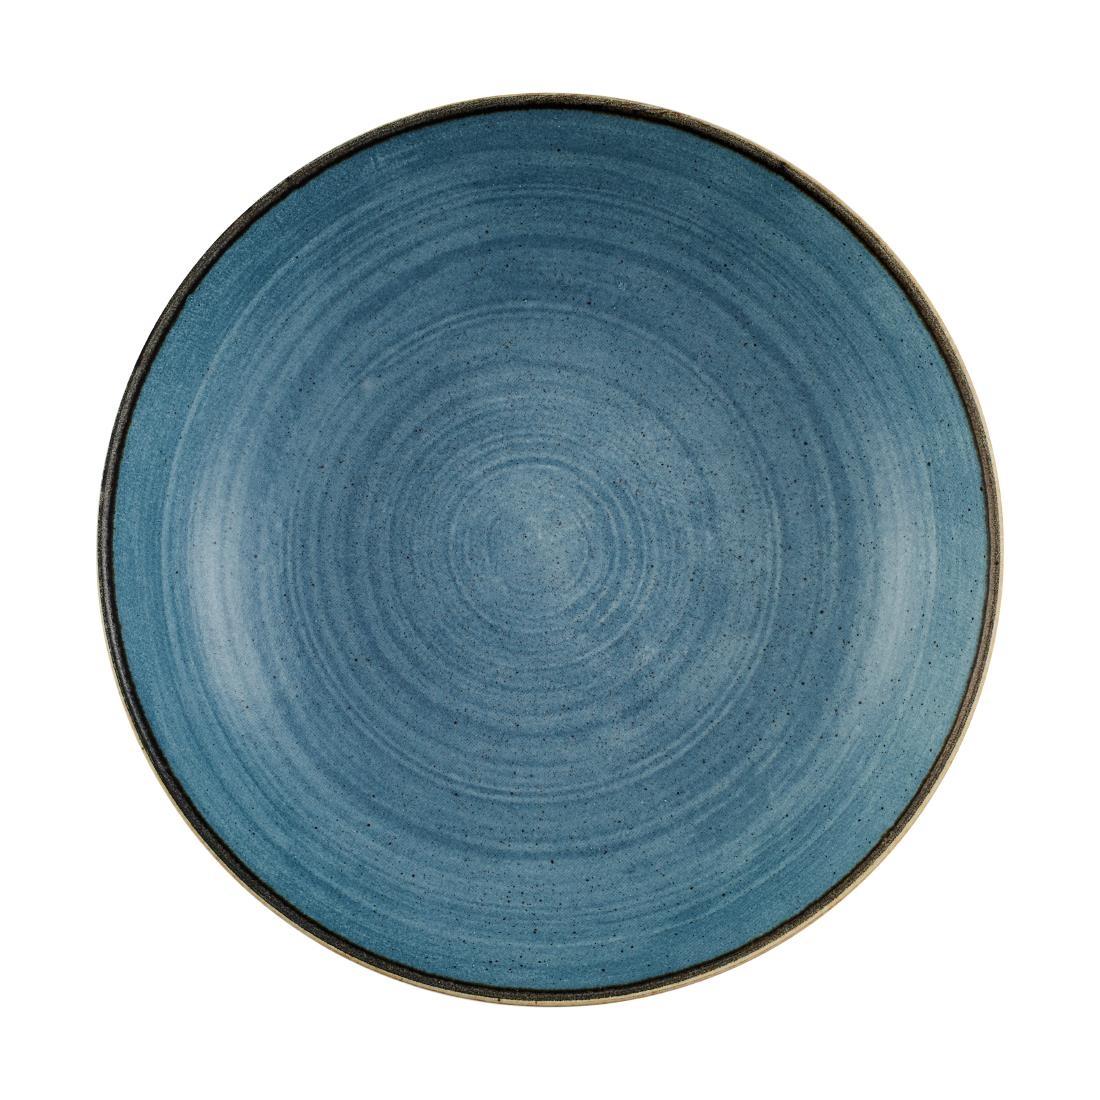 Churchill Stonecast Raw Evolve Coupe Bowls Teal 248mm (Pack of 12)